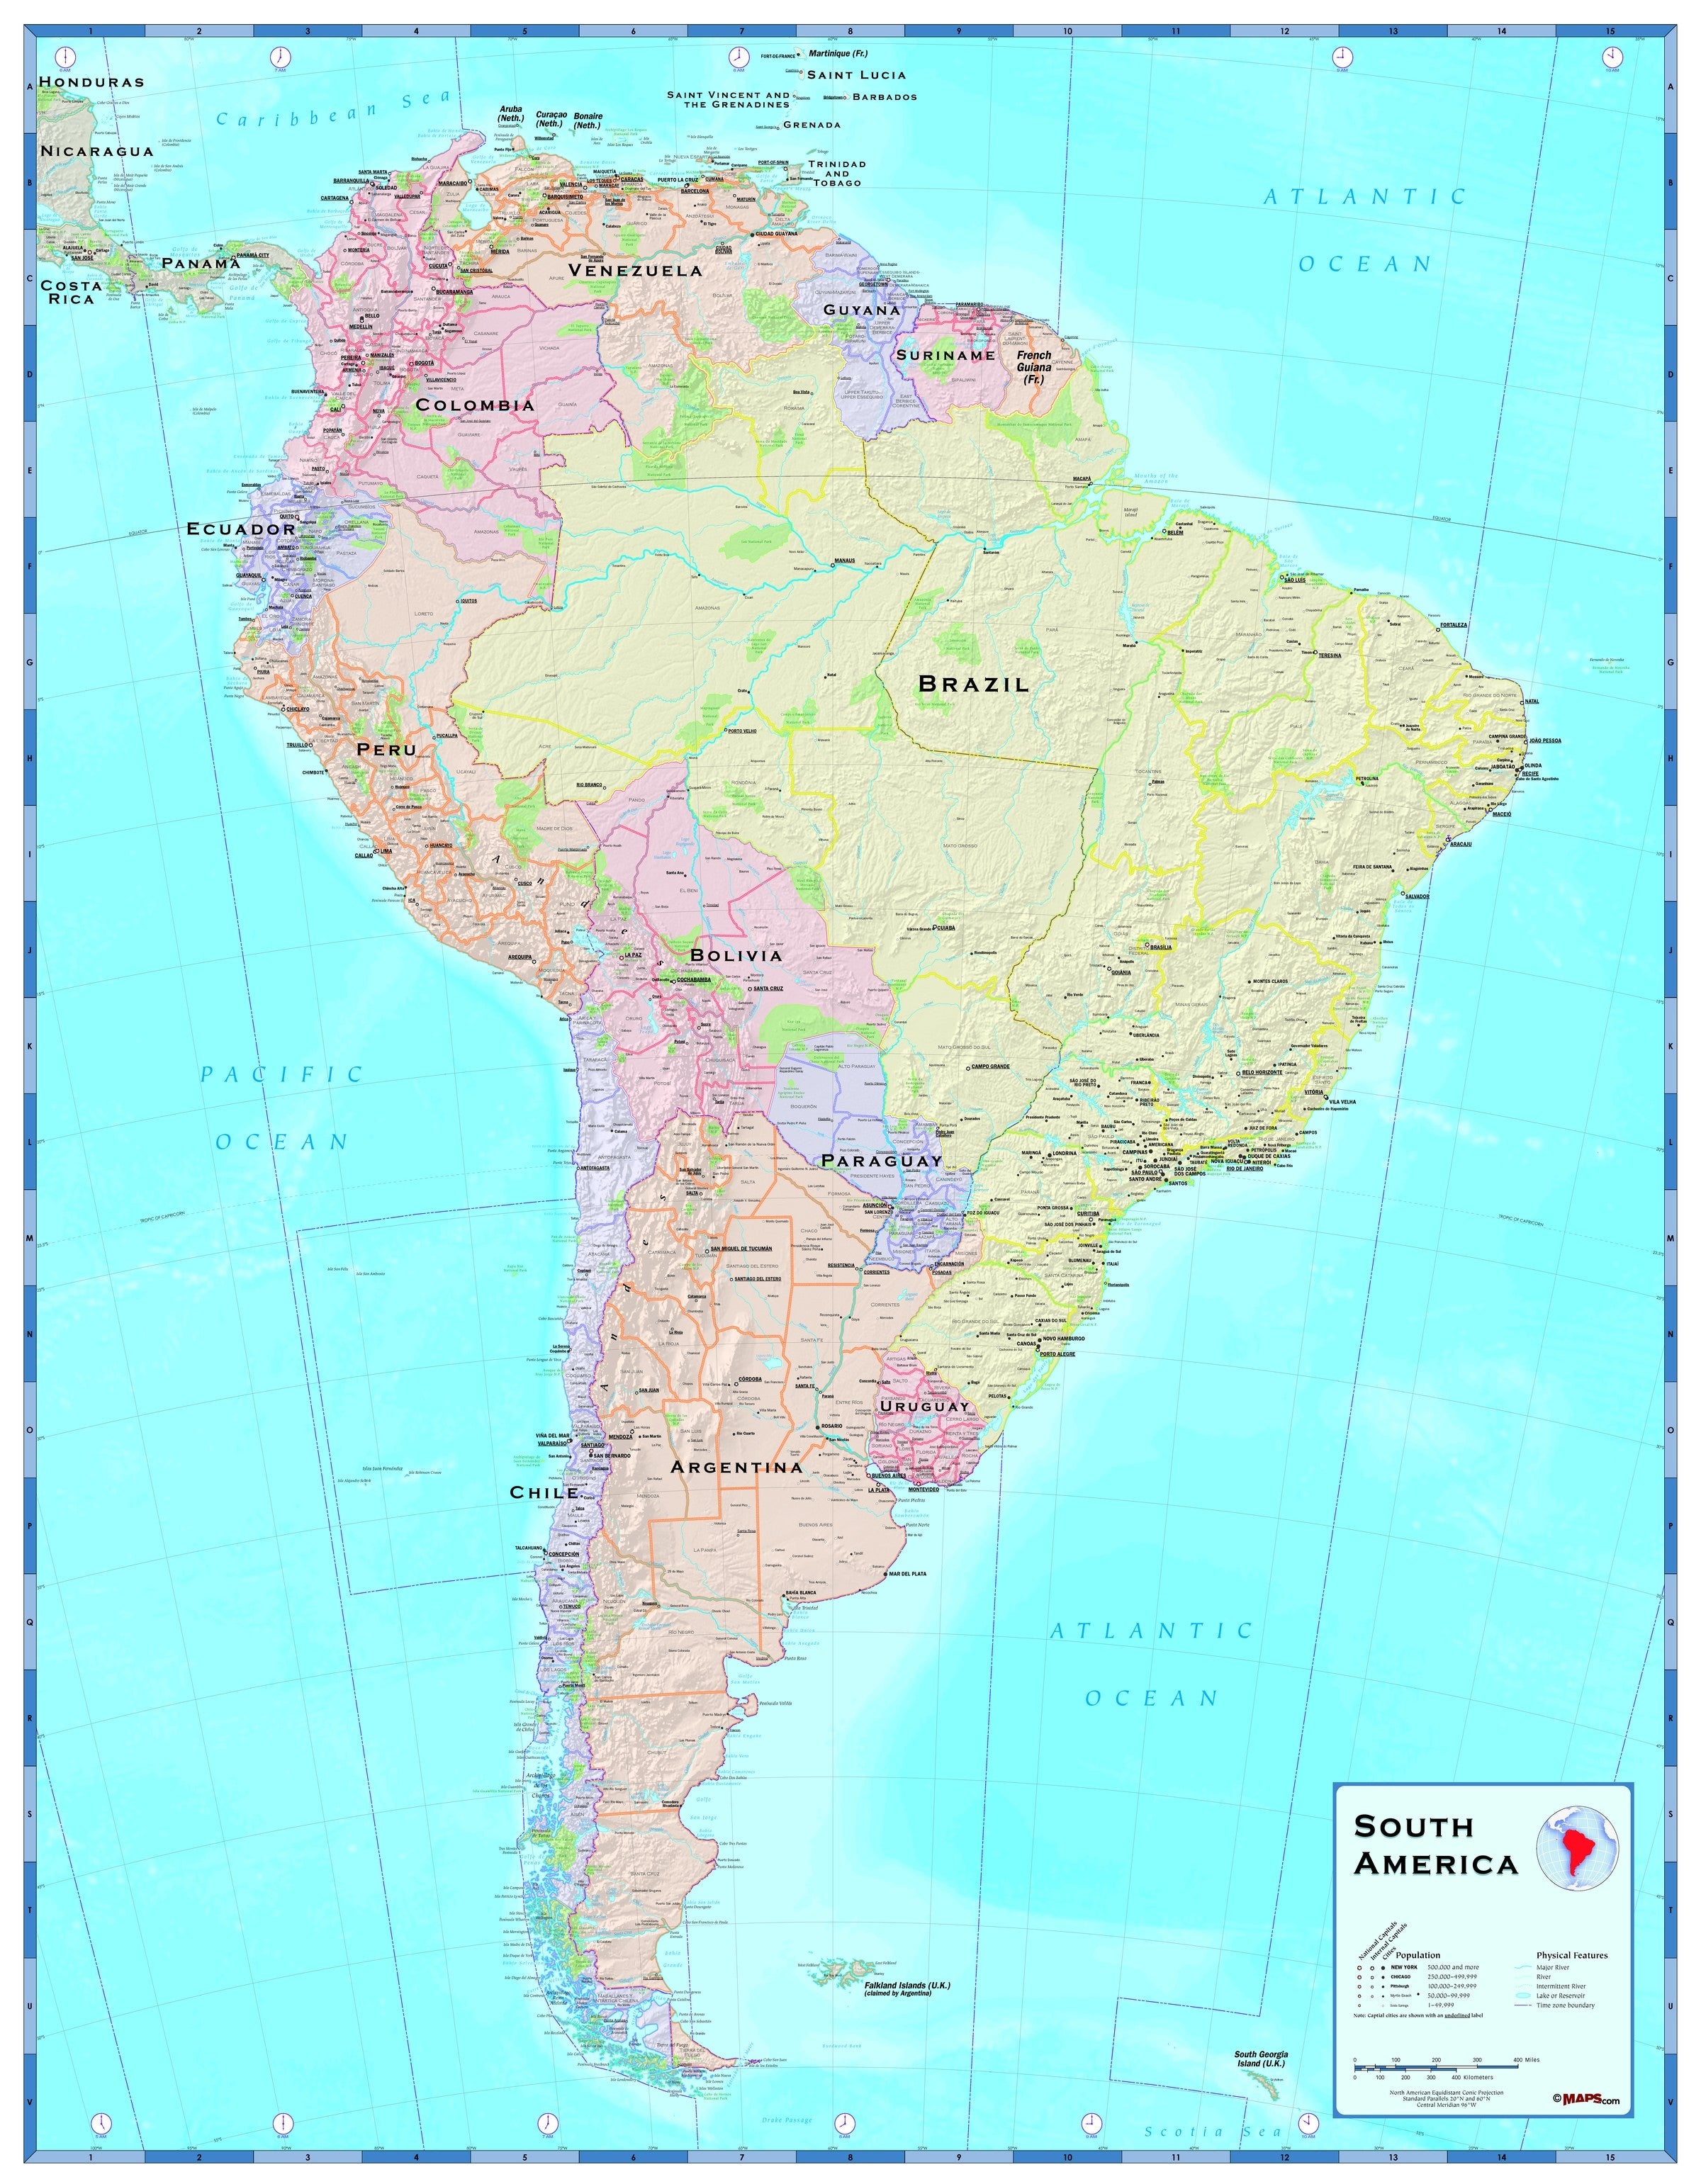 South America Political Map South America Mapsland Maps Of The World Images